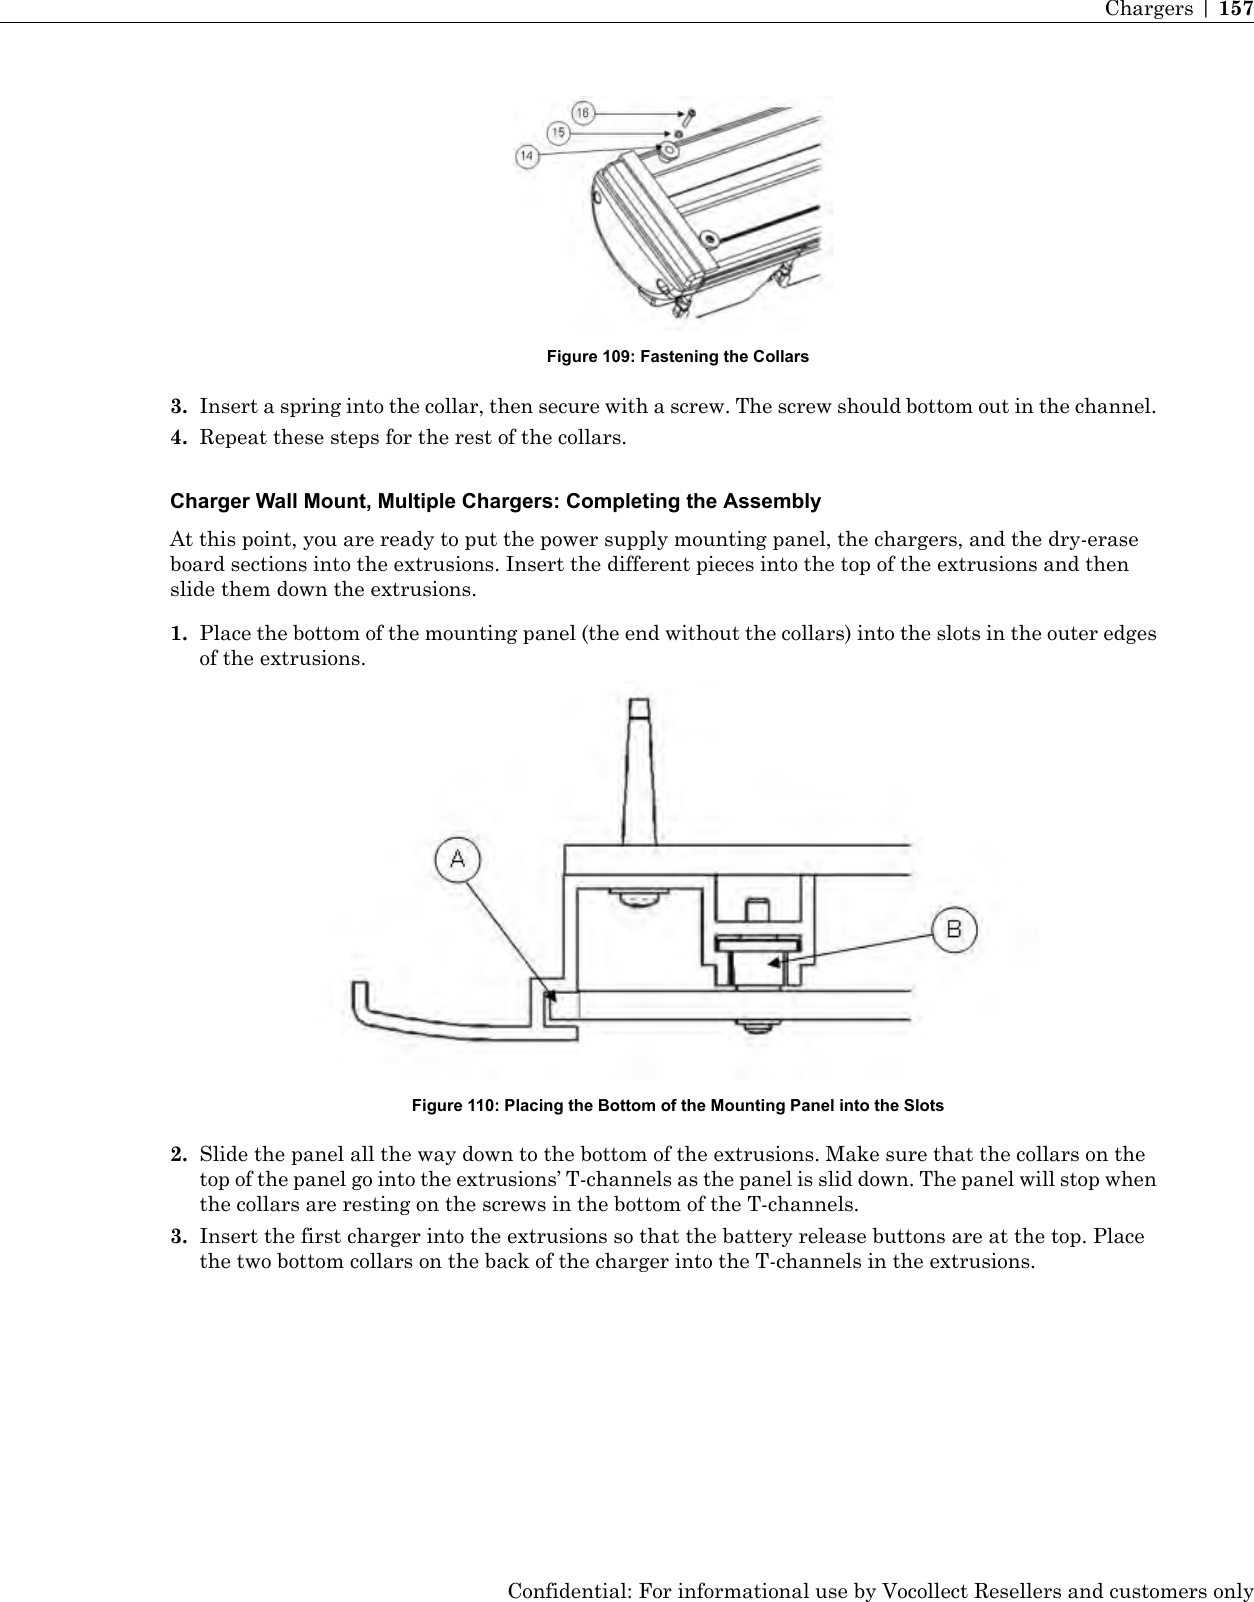 Figure 109: Fastening the Collars3. Insert a spring into the collar, then secure with a screw. The screw should bottom out in the channel.4. Repeat these steps for the rest of the collars.Charger Wall Mount, Multiple Chargers: Completing the AssemblyAt this point, you are ready to put the power supply mounting panel, the chargers, and the dry-eraseboard sections into the extrusions. Insert the different pieces into the top of the extrusions and thenslide them down the extrusions.1. Place the bottom of the mounting panel (the end without the collars) into the slots in the outer edgesof the extrusions.Figure 110: Placing the Bottom of the Mounting Panel into the Slots2. Slide the panel all the way down to the bottom of the extrusions. Make sure that the collars on thetop of the panel go into the extrusions’ T-channels as the panel is slid down. The panel will stop whenthe collars are resting on the screws in the bottom of the T-channels.3. Insert the first charger into the extrusions so that the battery release buttons are at the top. Placethe two bottom collars on the back of the charger into the T-channels in the extrusions.Confidential: For informational use by Vocollect Resellers and customers onlyChargers | 157